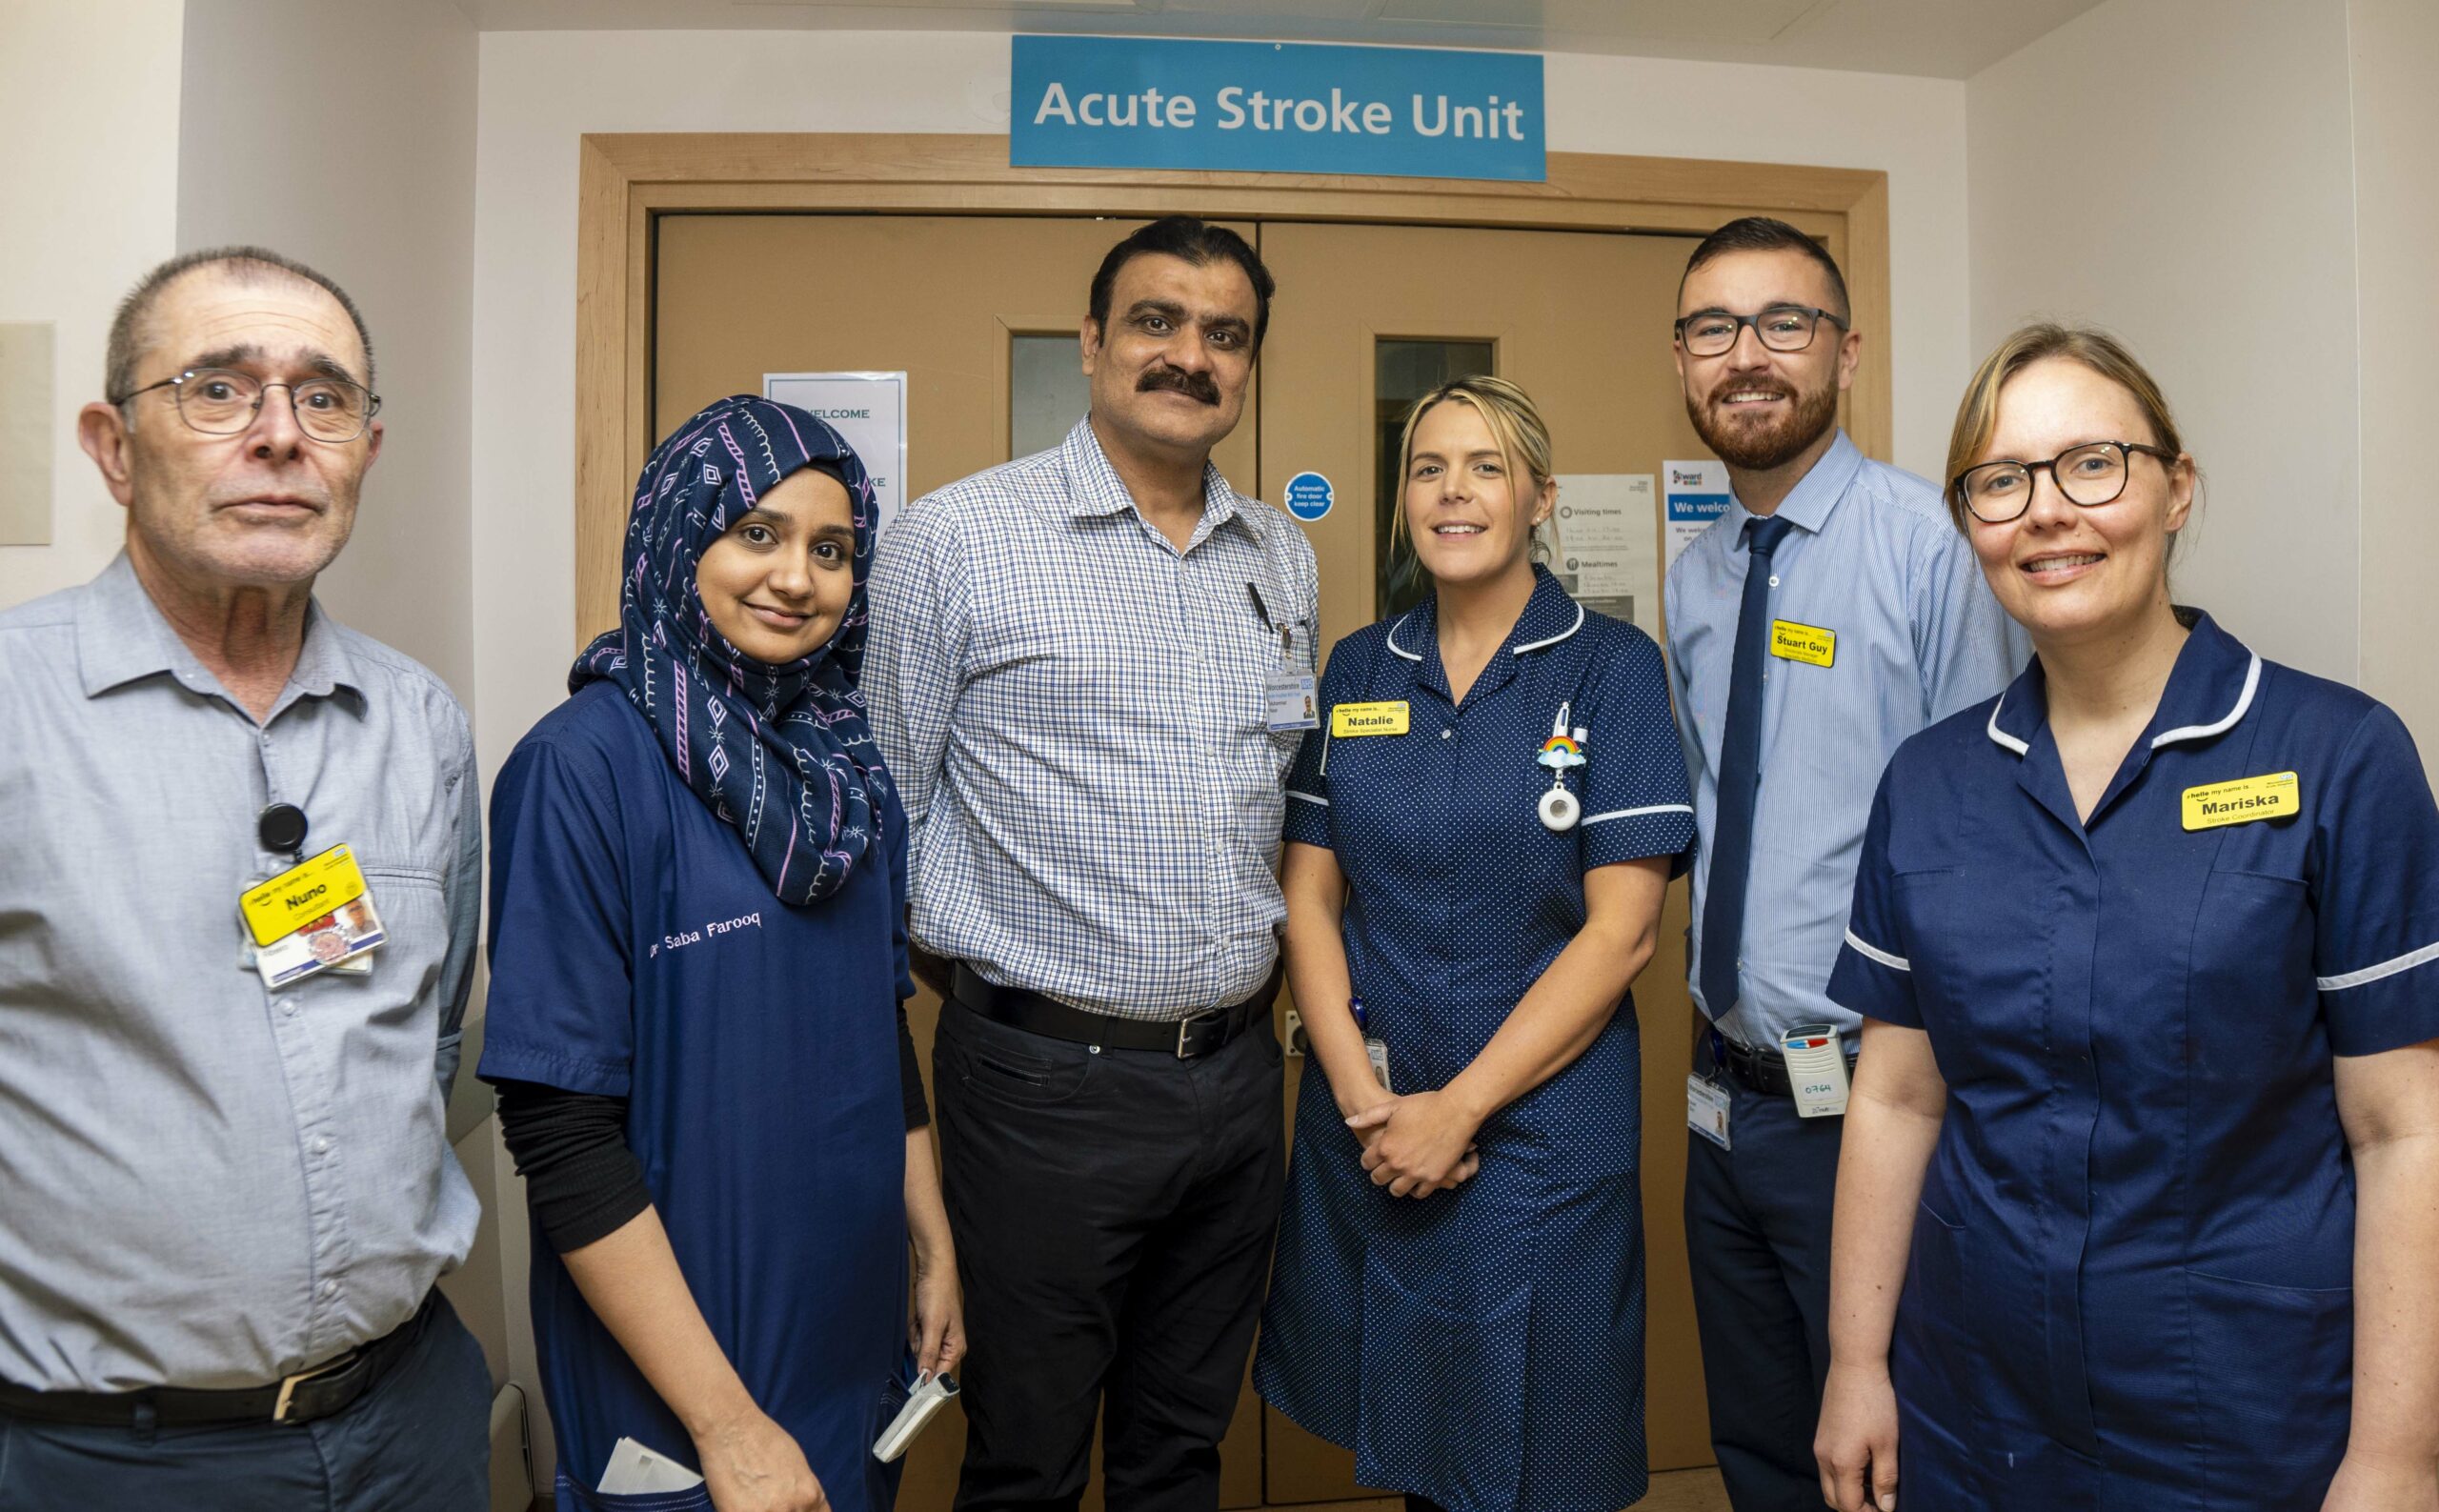 Members of the Stroke Unit team at Worcestershire Royal Hospital stood outside the Acute Stroke Unit entrance.